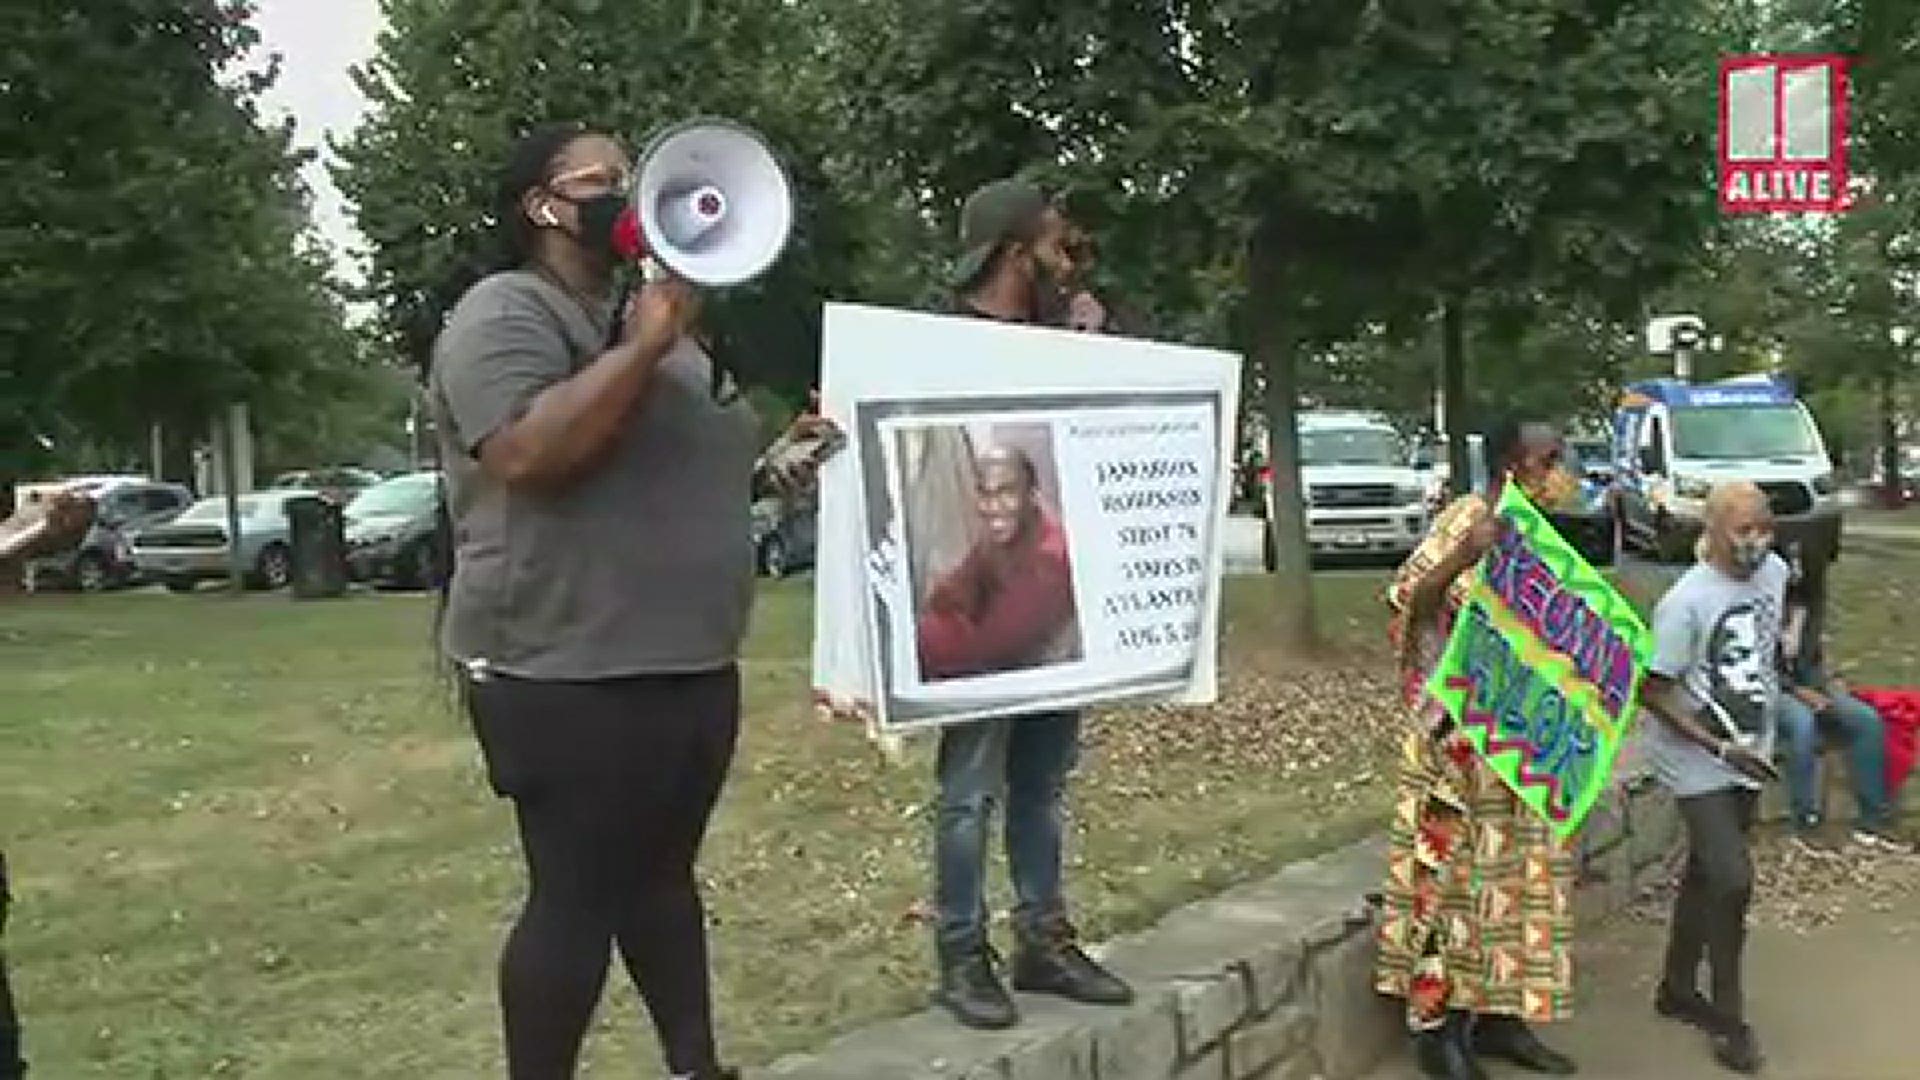 A group gathered at Atlanta's Johnson Park on Wednesday night after the announcement of one indictment in the Breonna Taylor case, for endangerment of her neighbors.